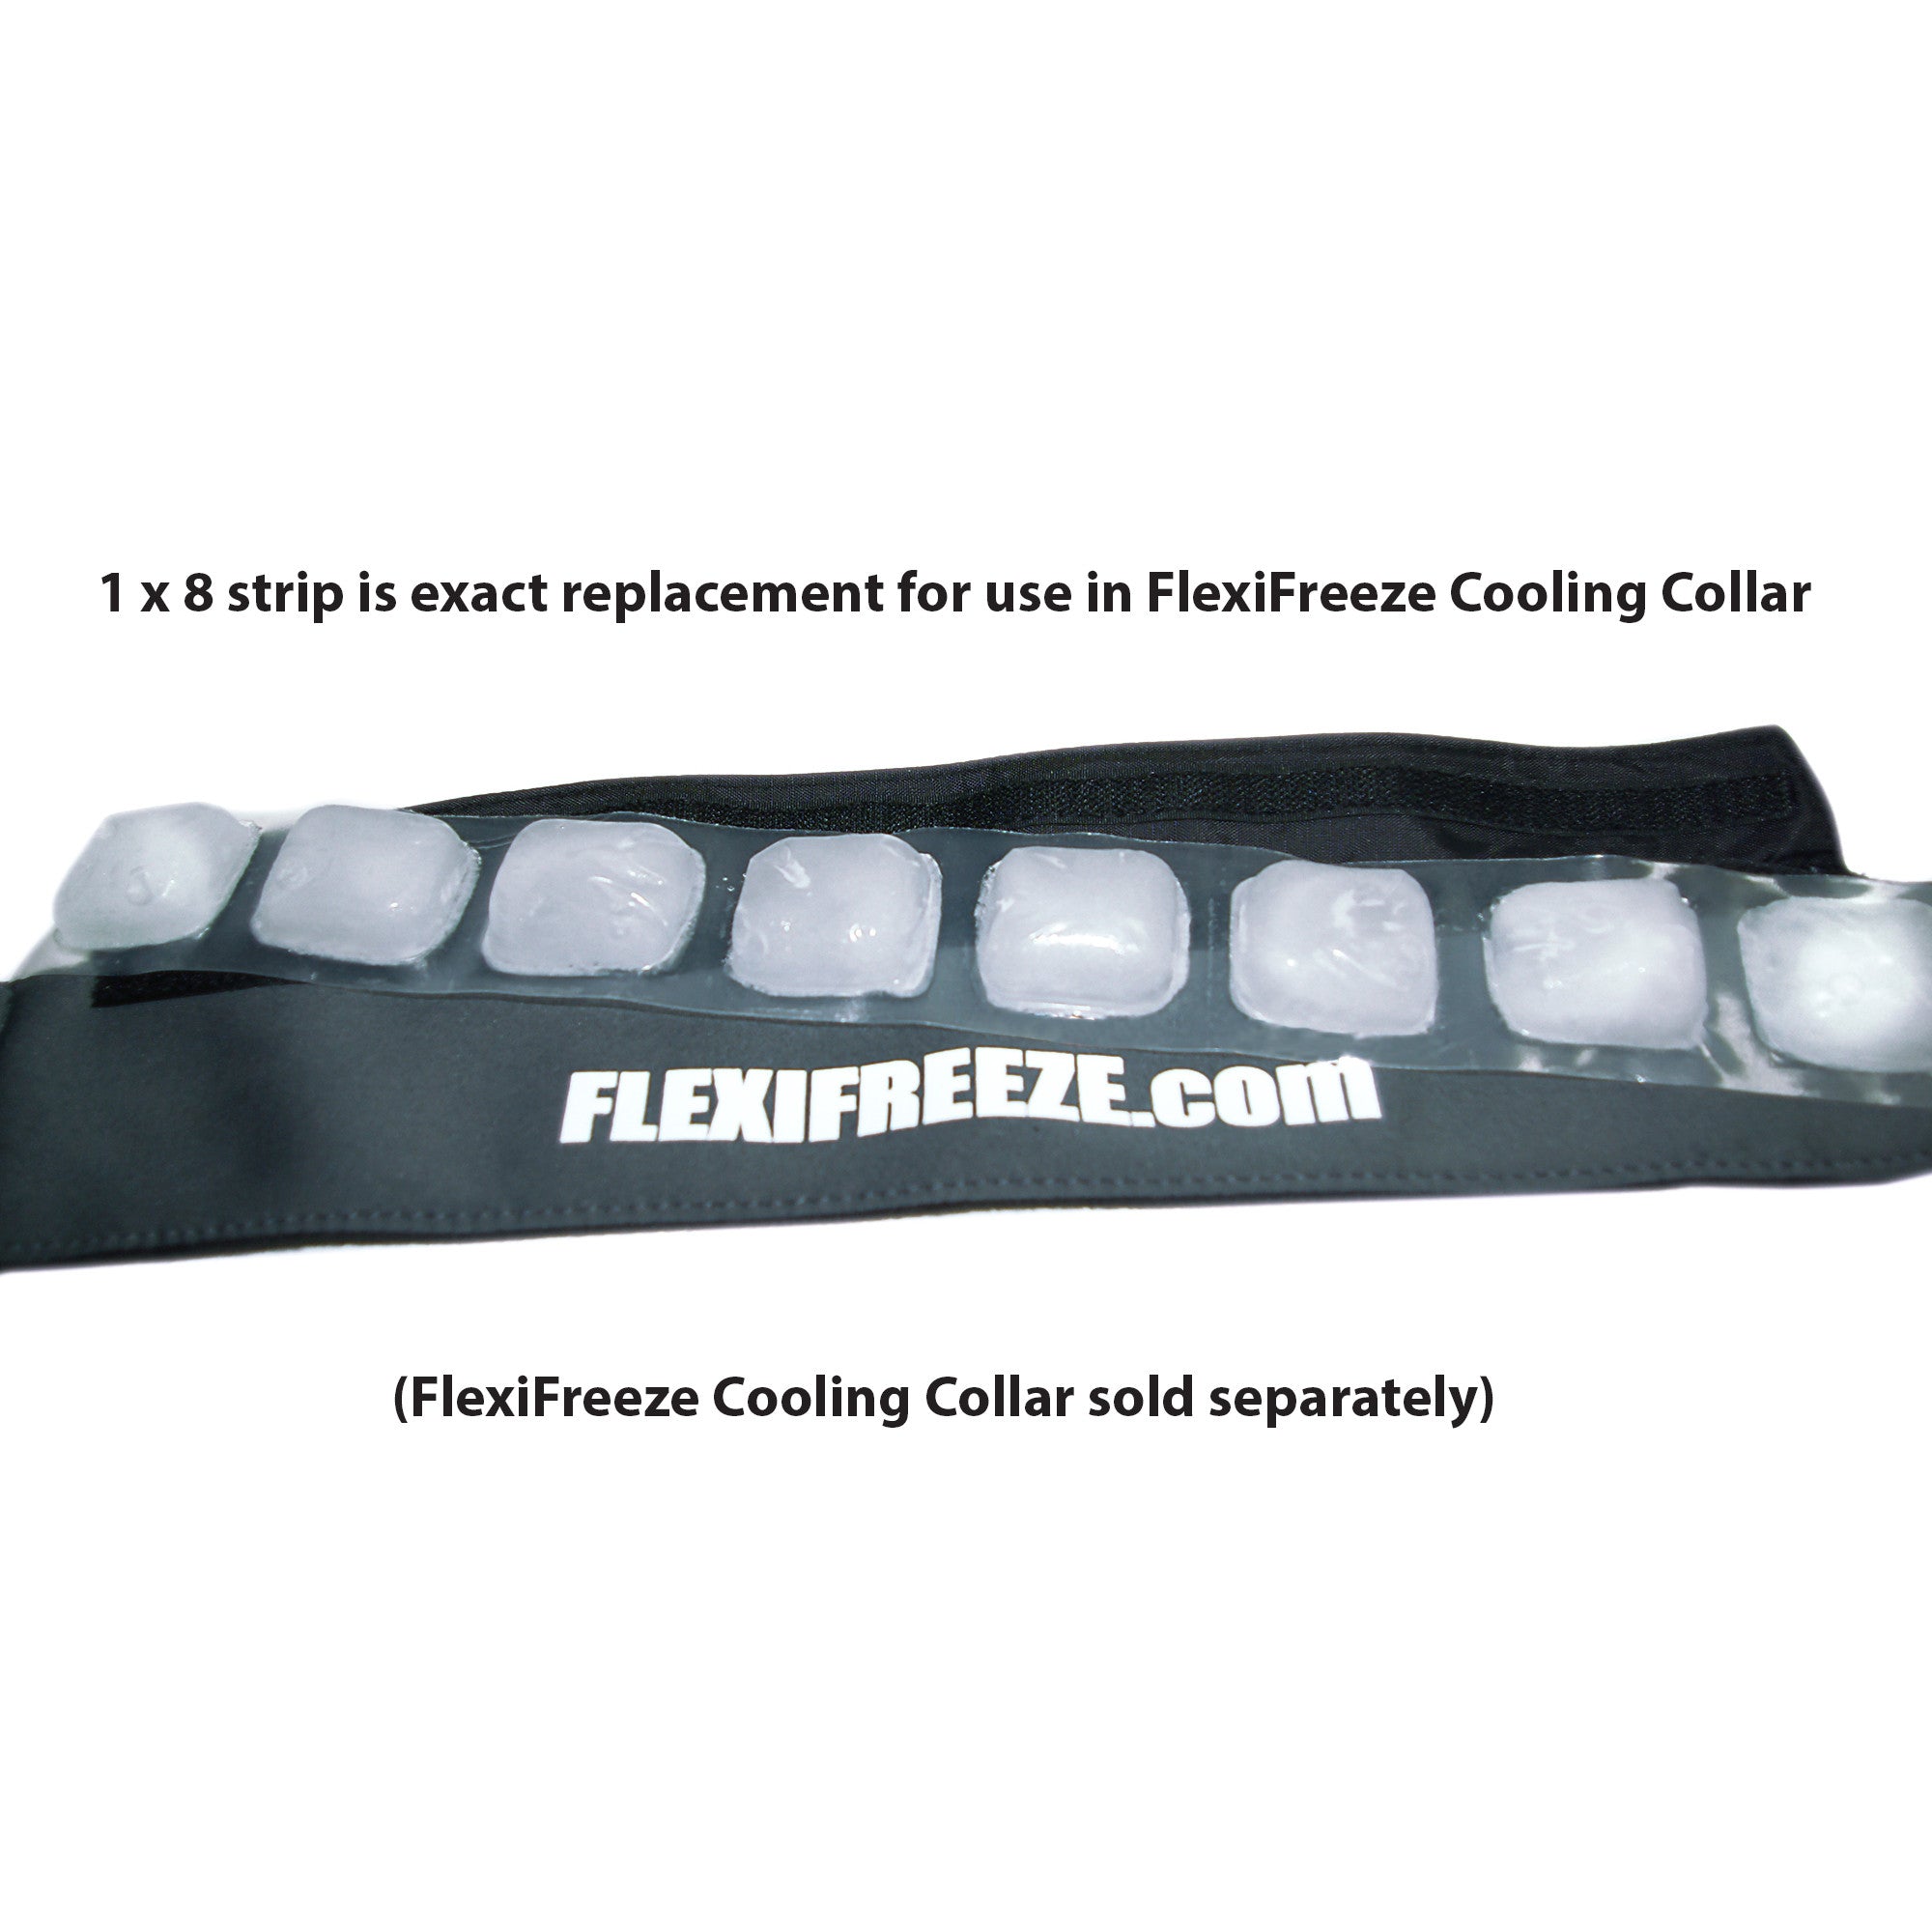 FlexiFreeze set of 1 by 8 ice strips, 12 count